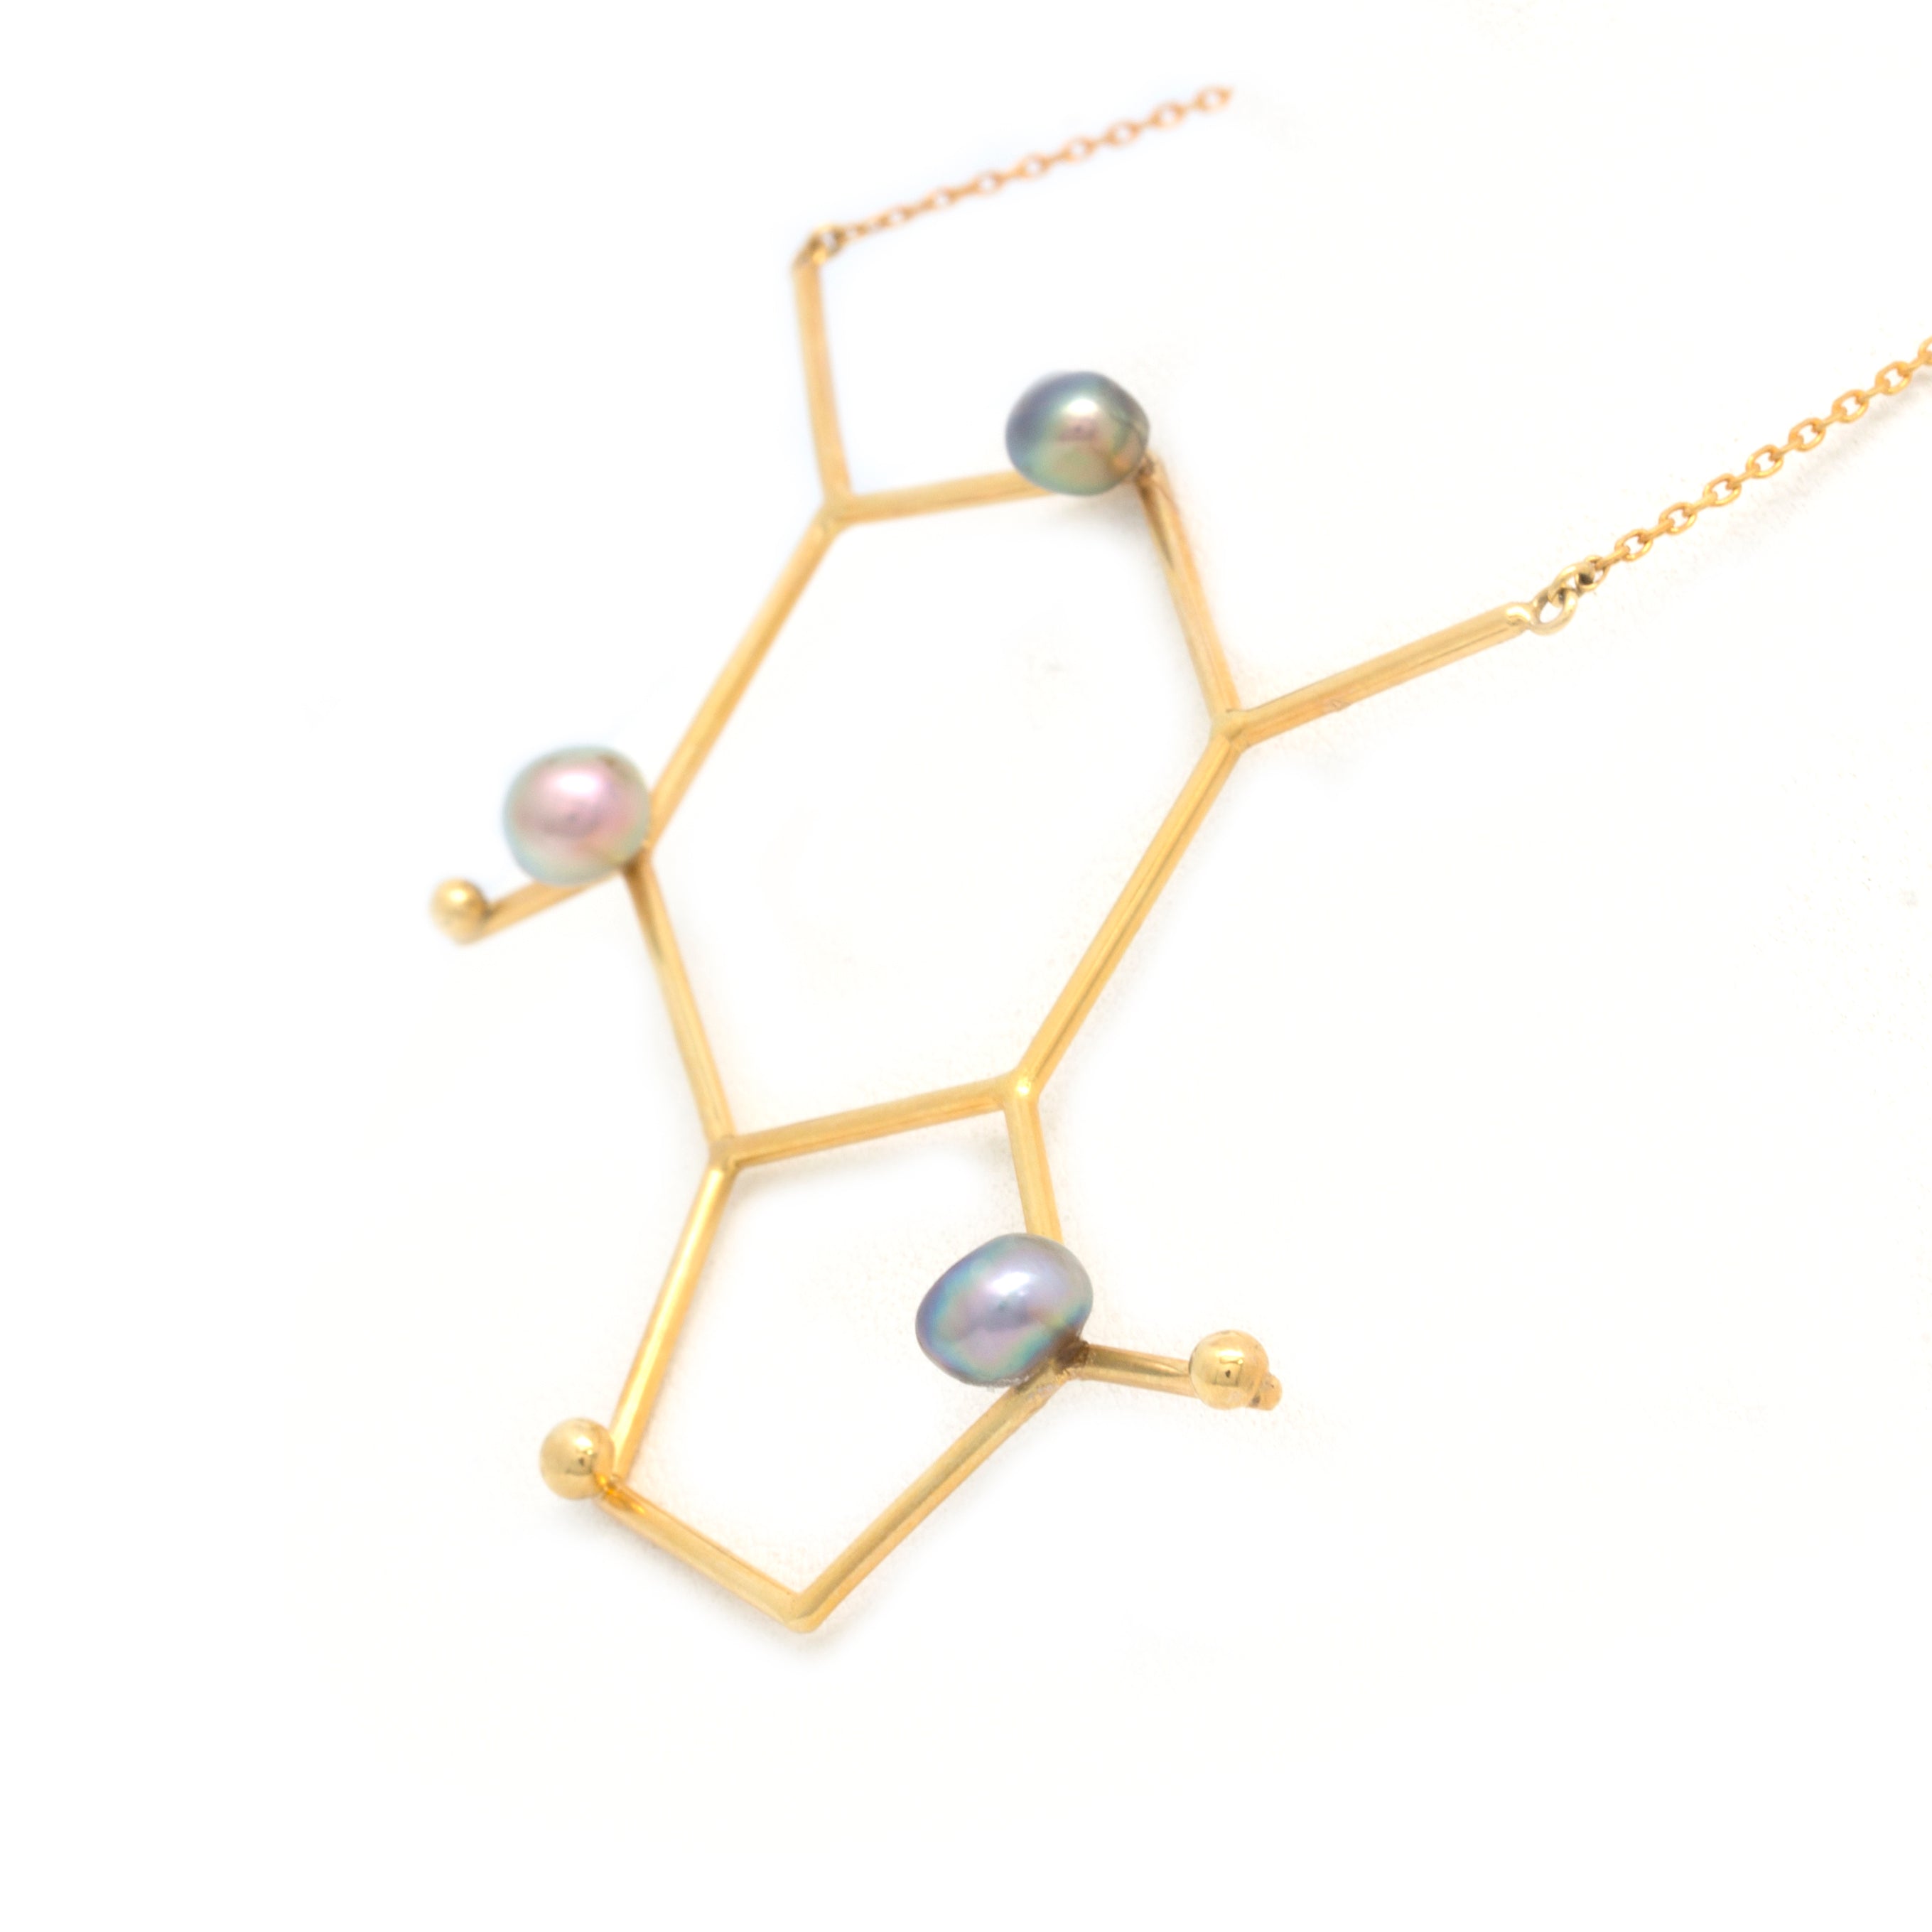 "Caffeine" 14K Yellow Gold Pendant and Chain with Cortez Keshi Pearls